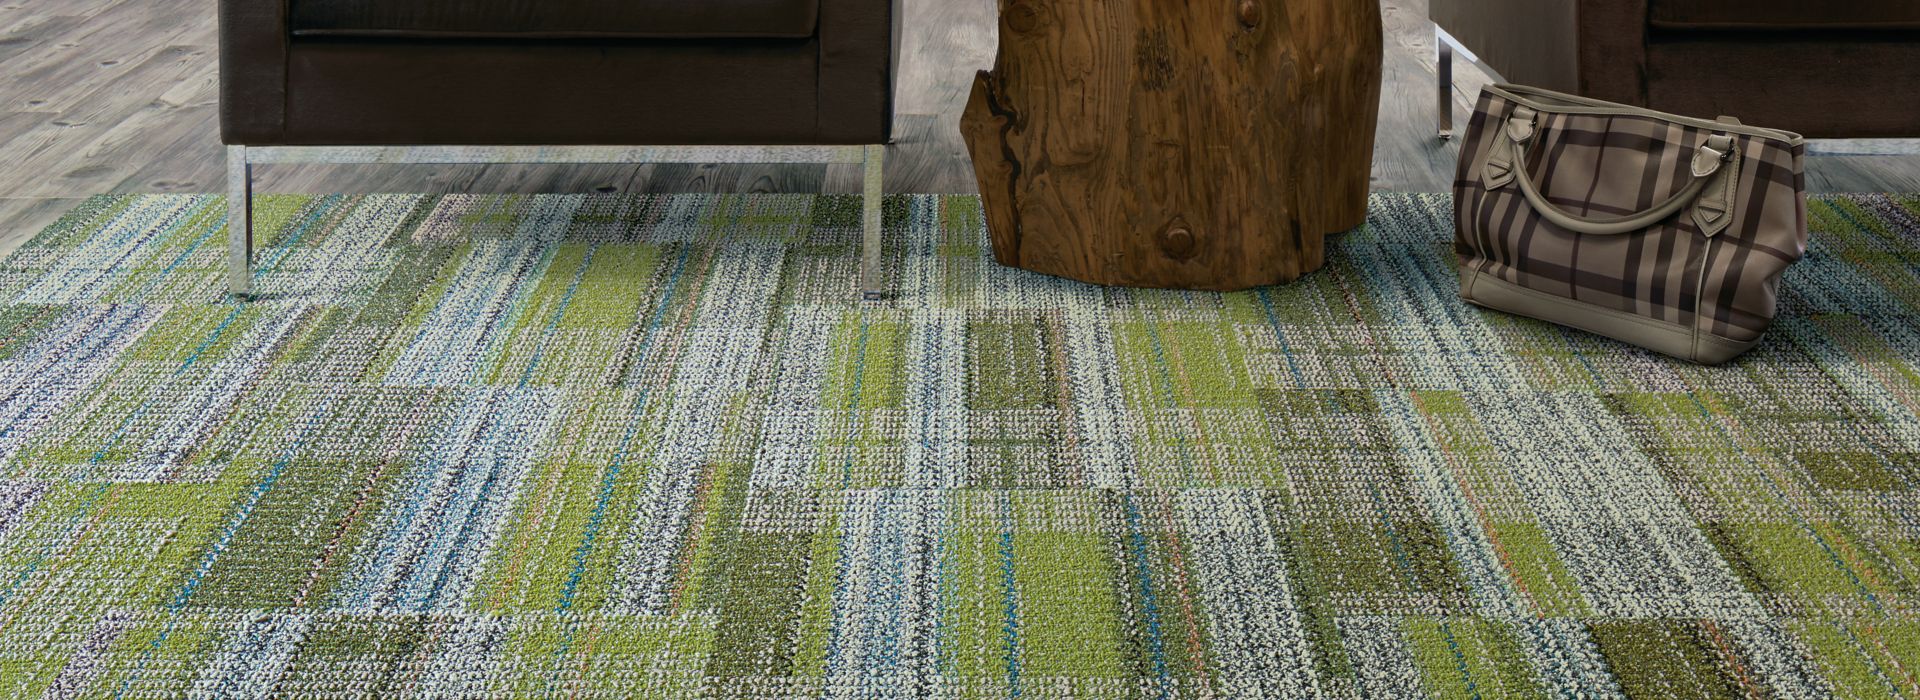 Interface Summerhouse Brights carpet tile and Natural Woodgrains LVT in seating area with black chairs numéro d’image 2